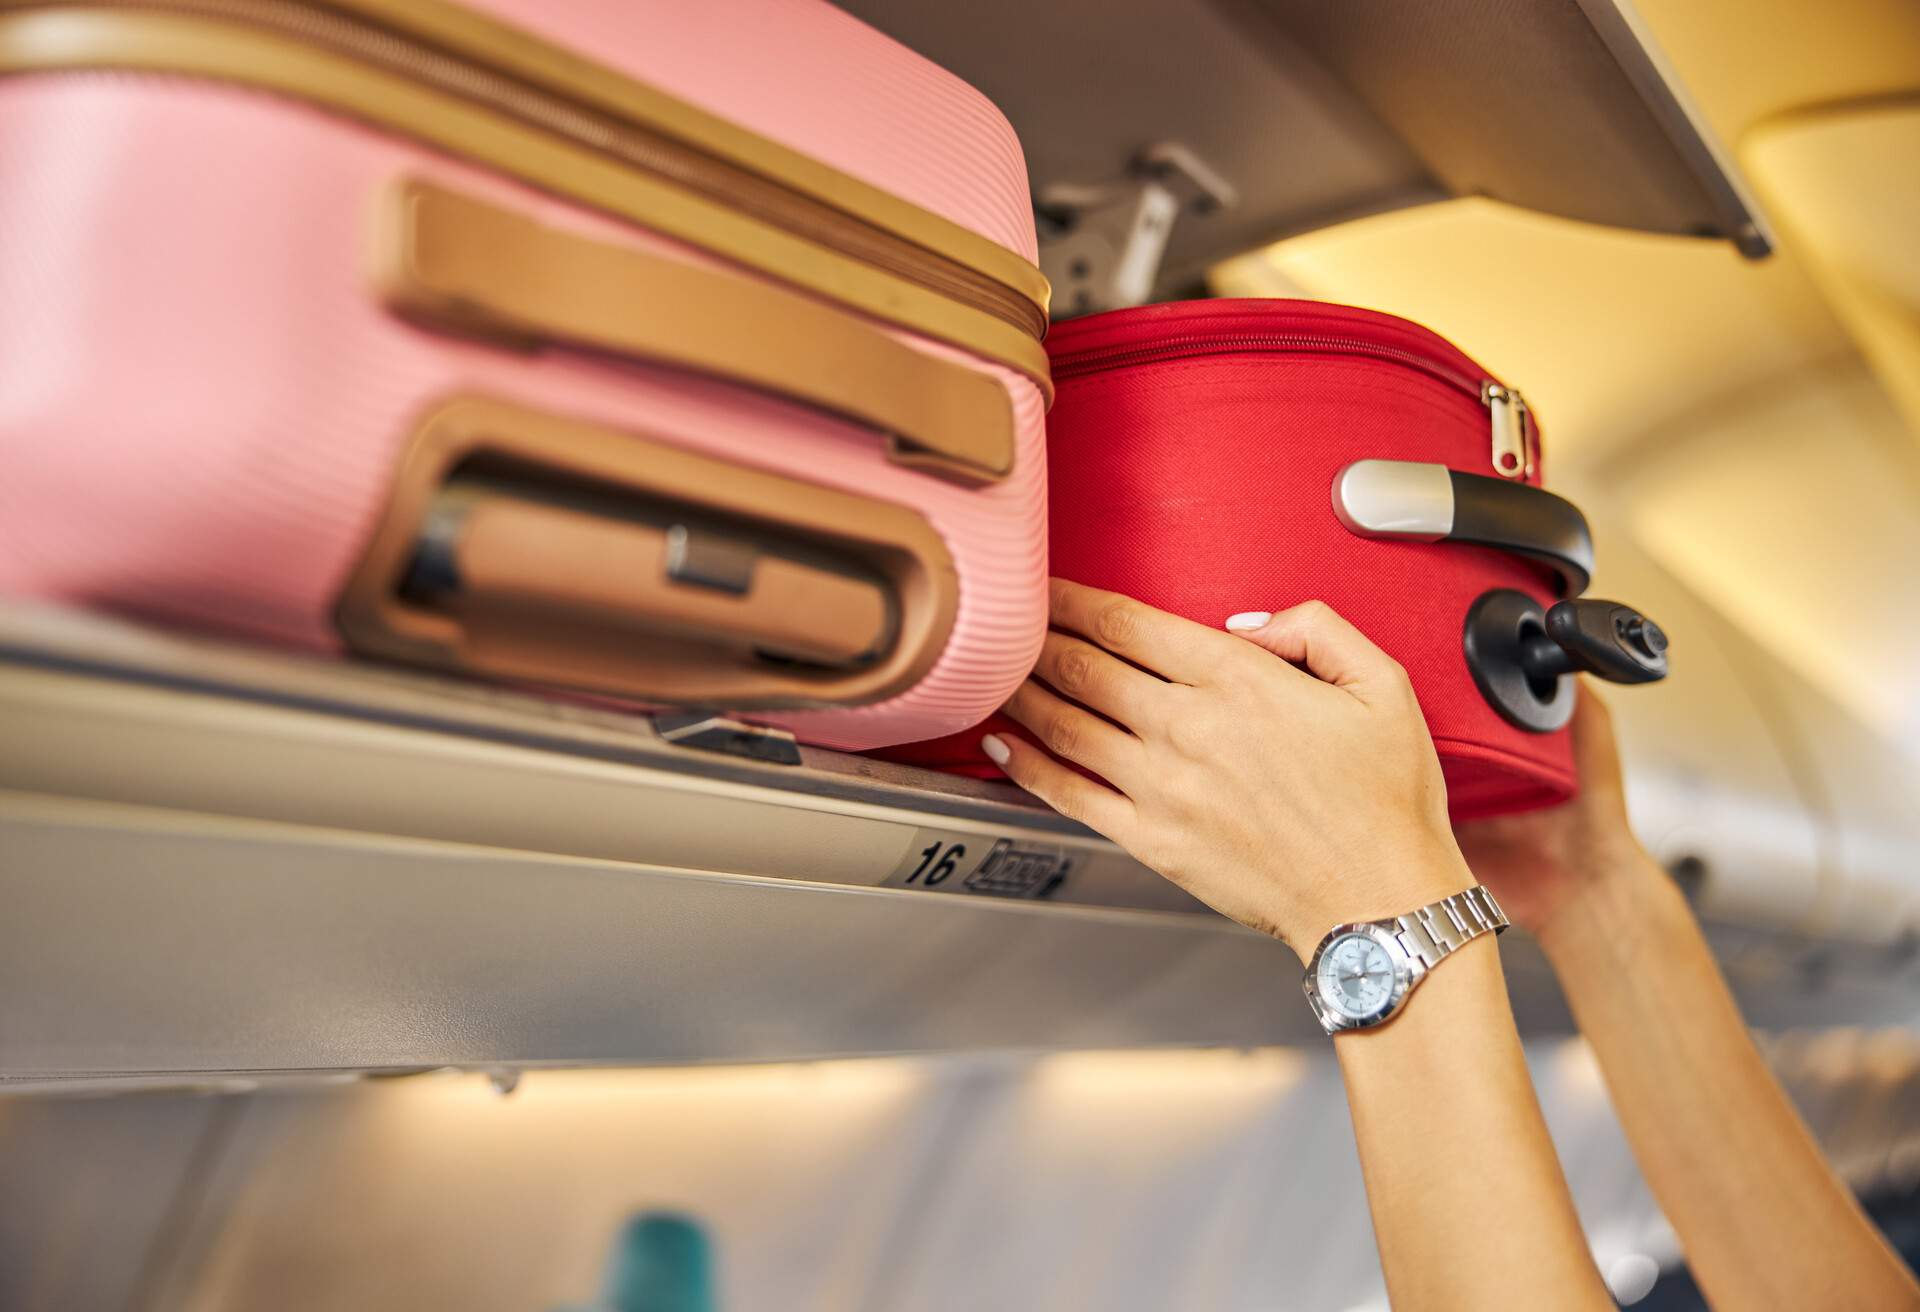 Arms shoving a small piece of luggage to the top shelf of an aircraft.